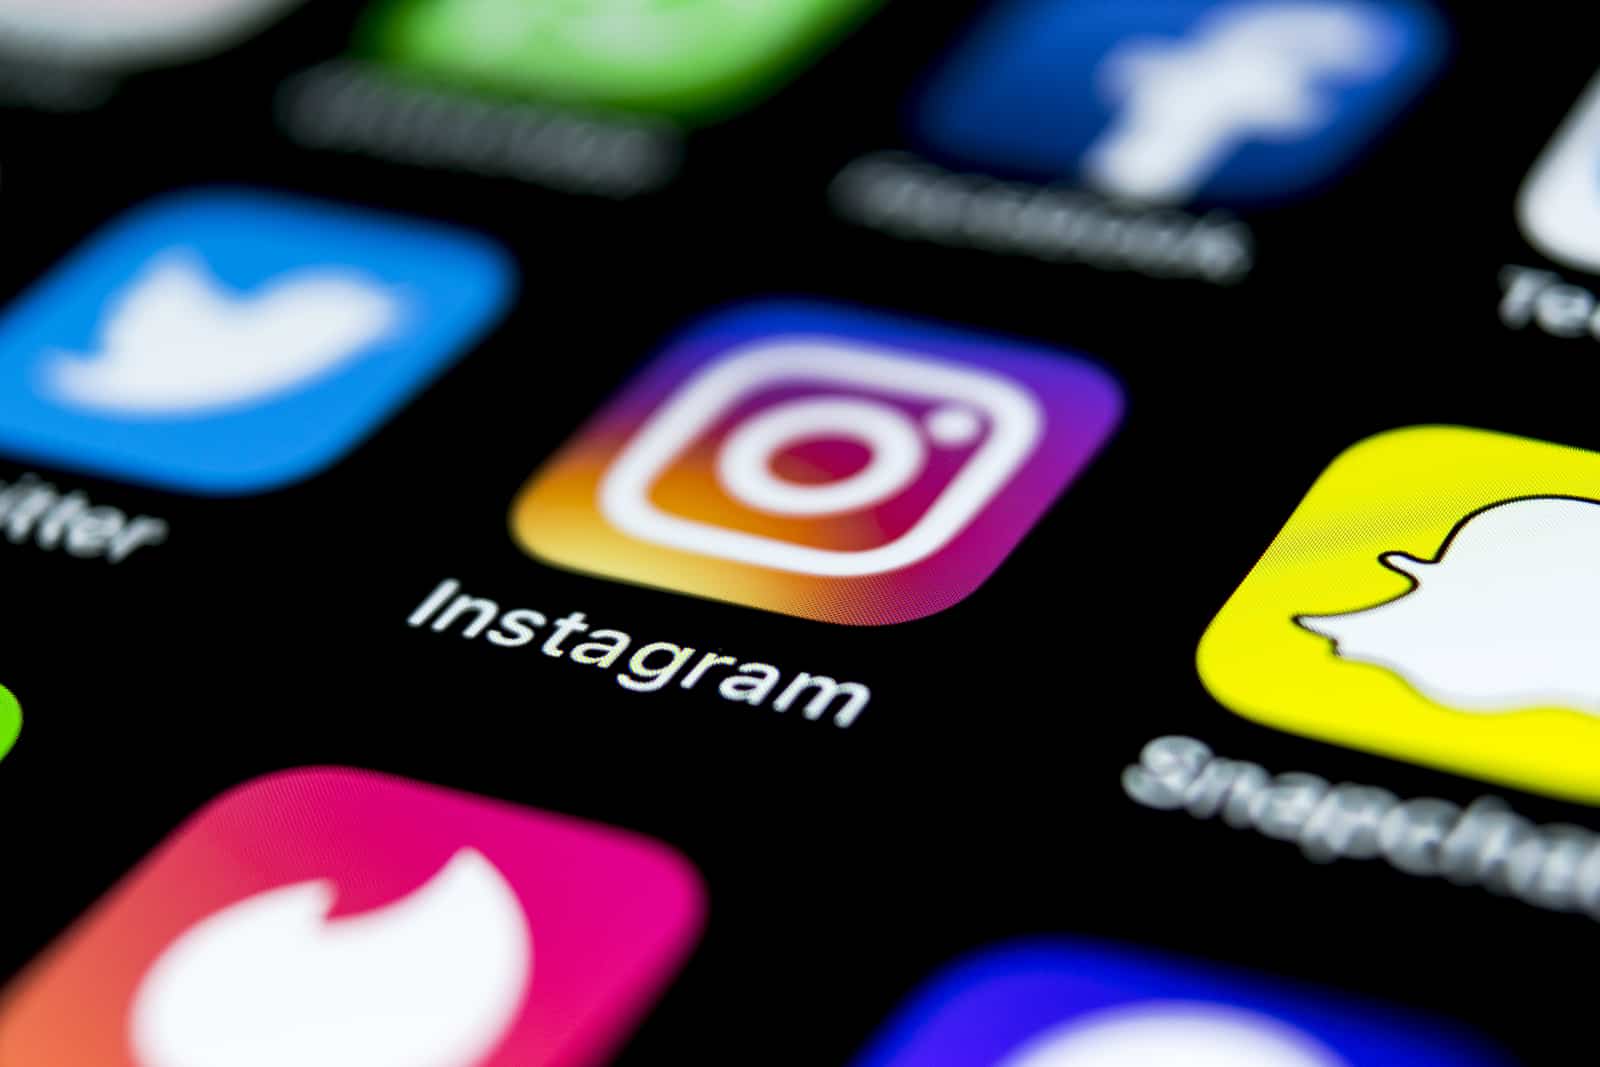 Most Popular Instagram Hashtags to Increase Engagement